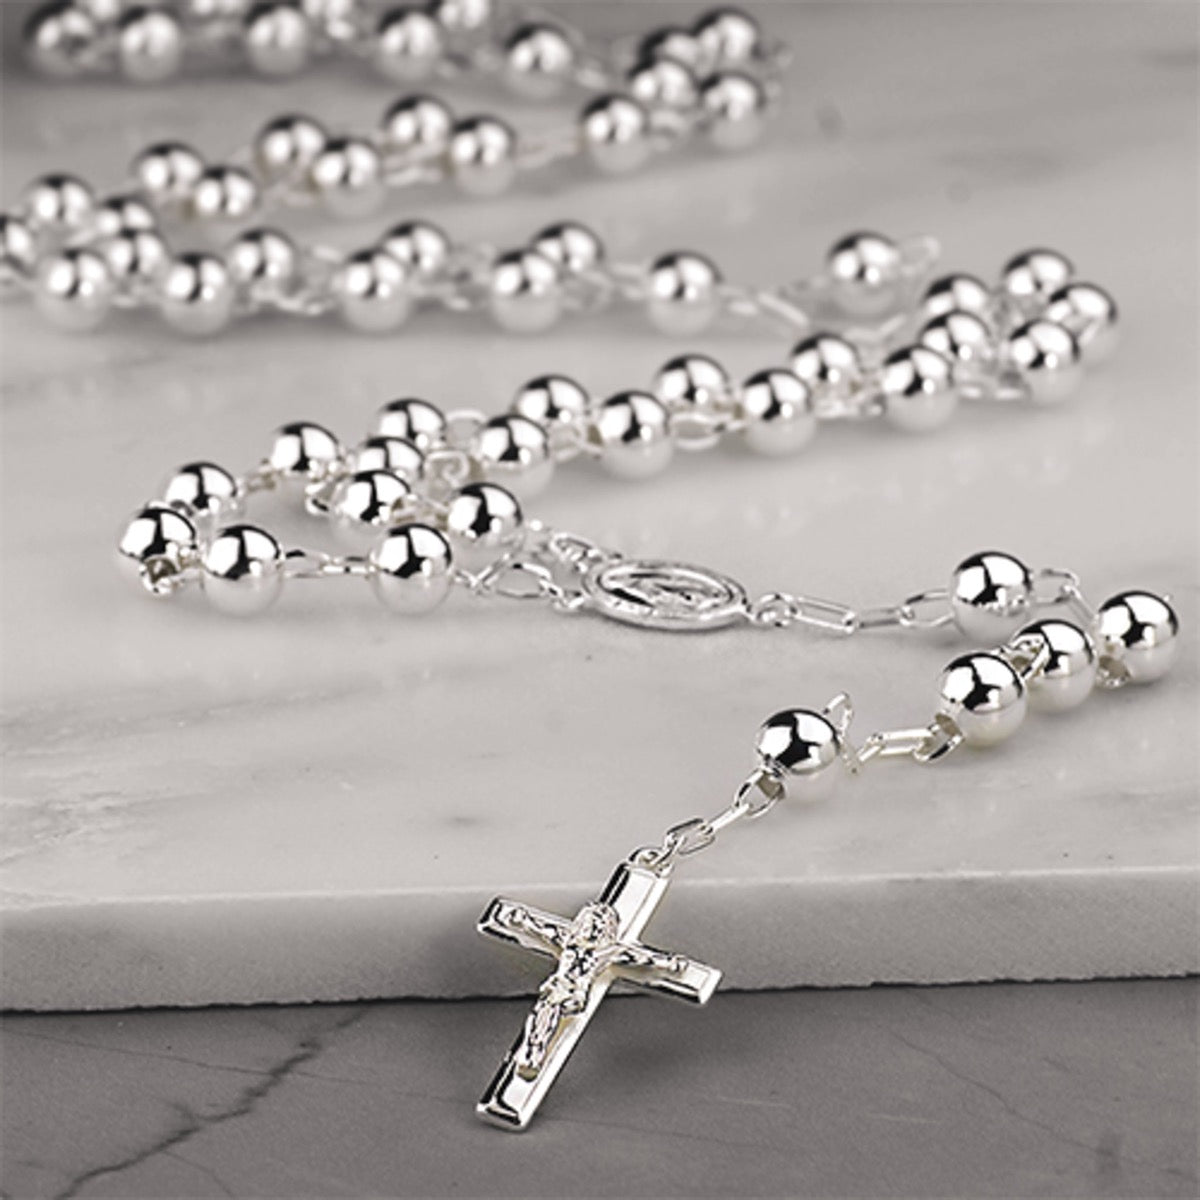 Sterling Silver Rosary Necklace